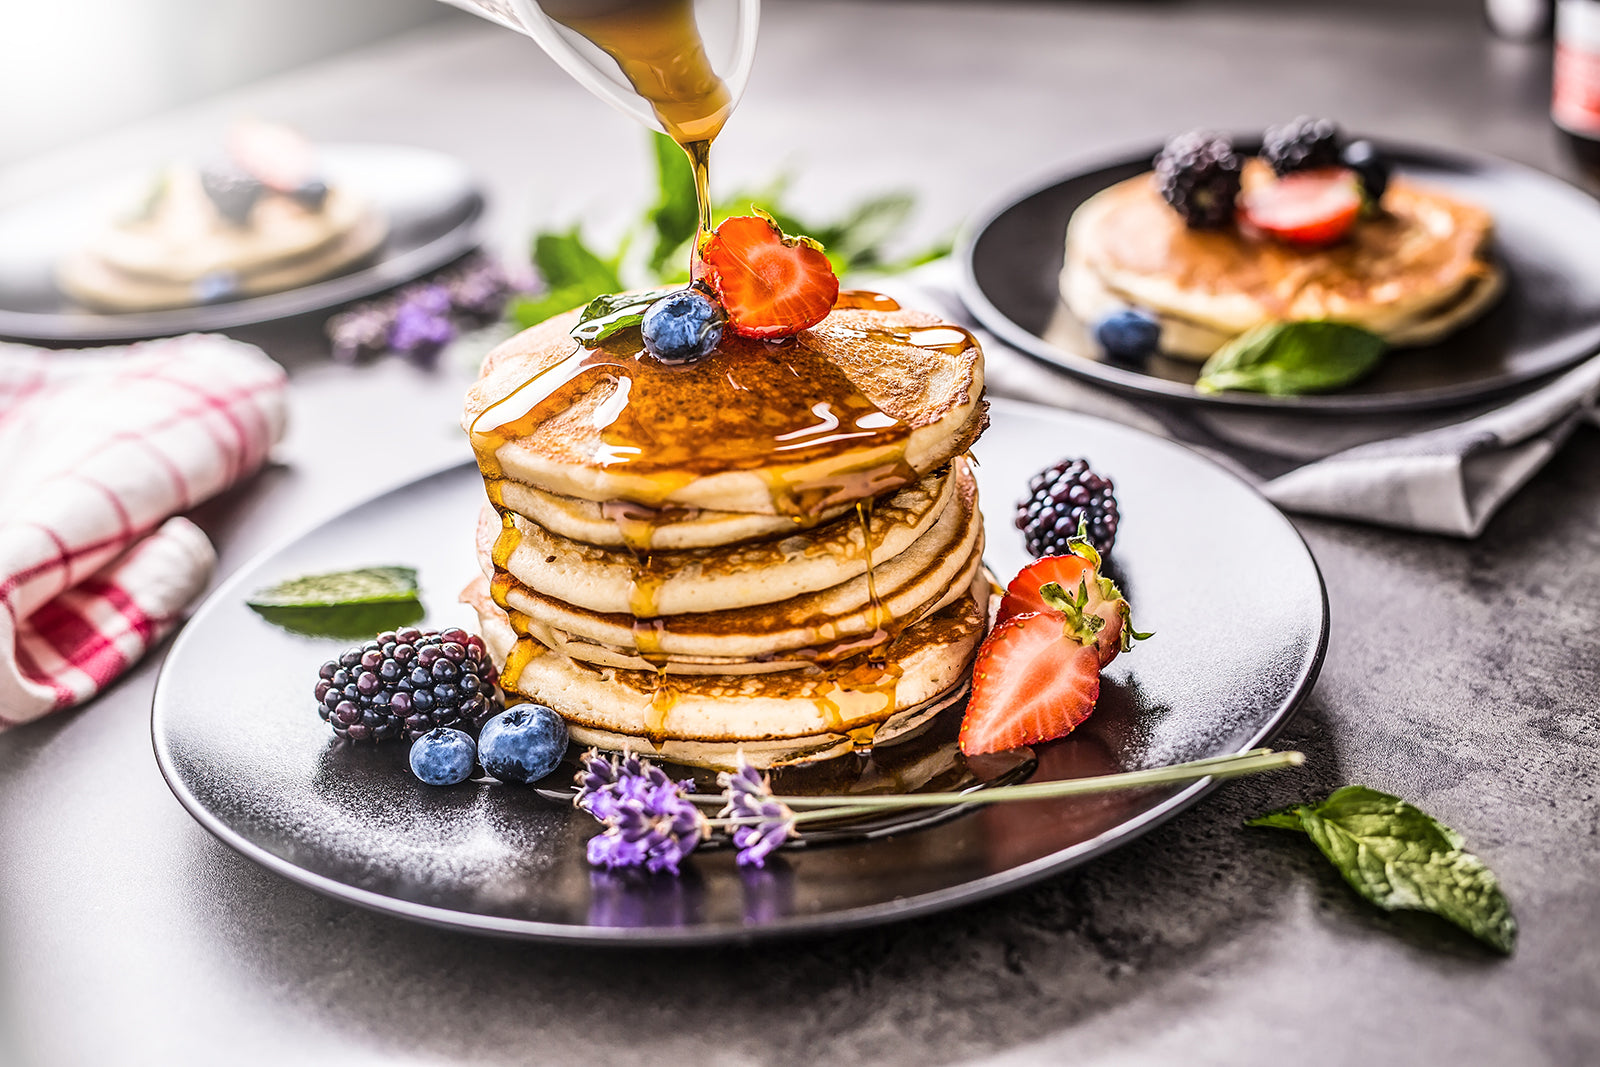 10 Delicious Mother's Day Brunch Ideas to Spoil Mom